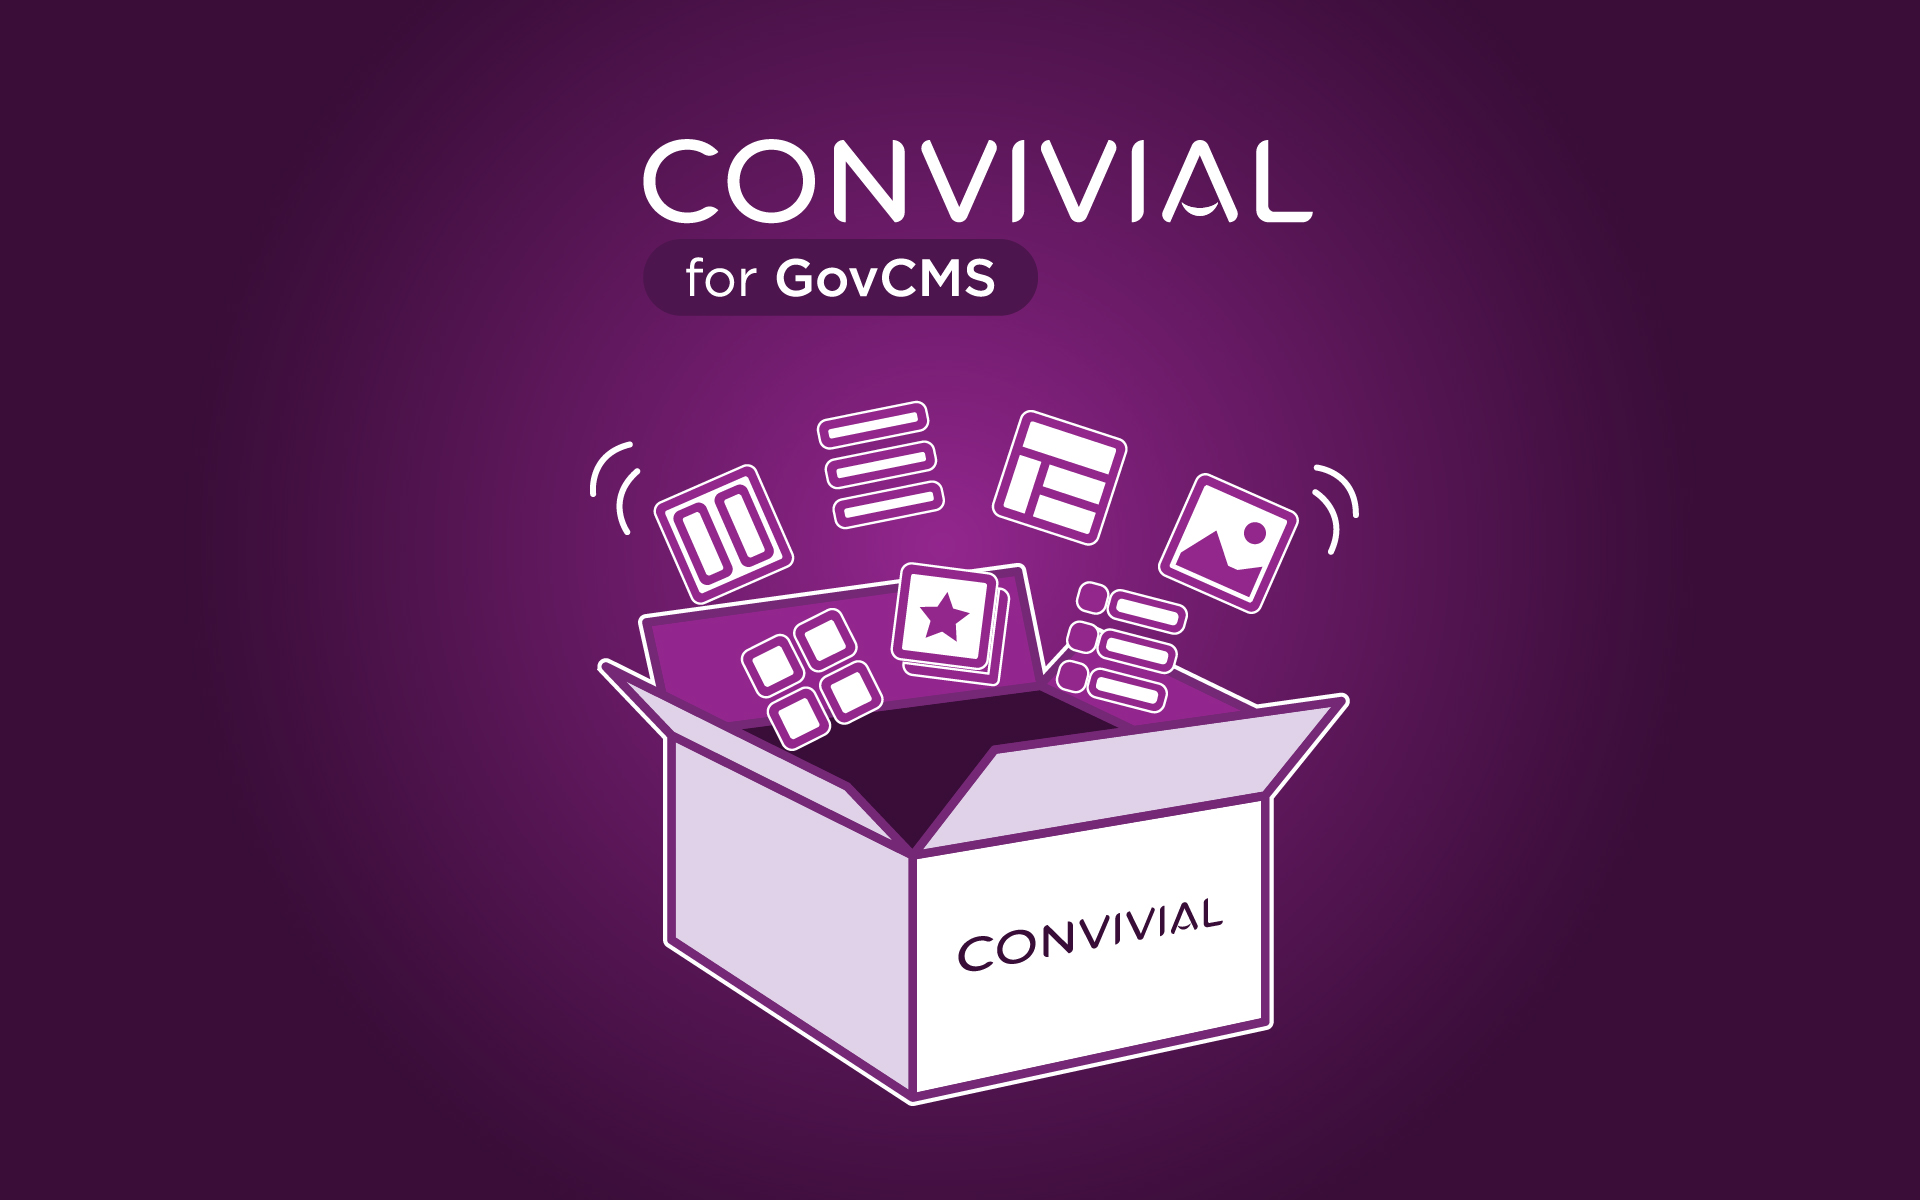 Convivial for GovCMS - Your site up and running ASAP